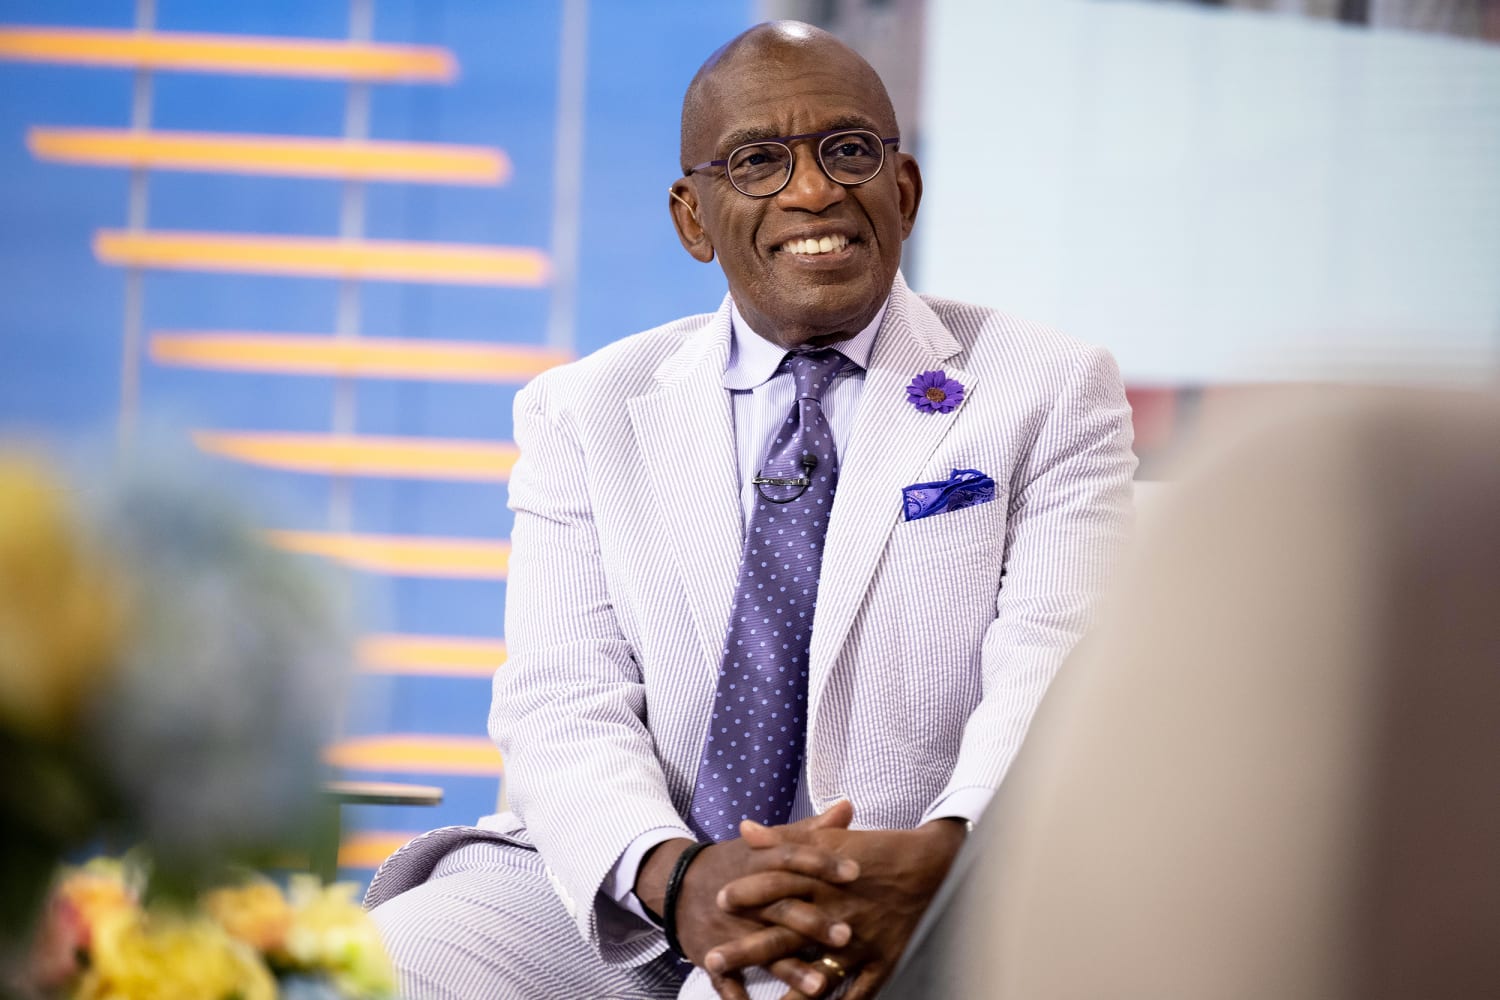 Al Roker beams with joy for his first Grandparents' Day with granddaughter Sky Clara